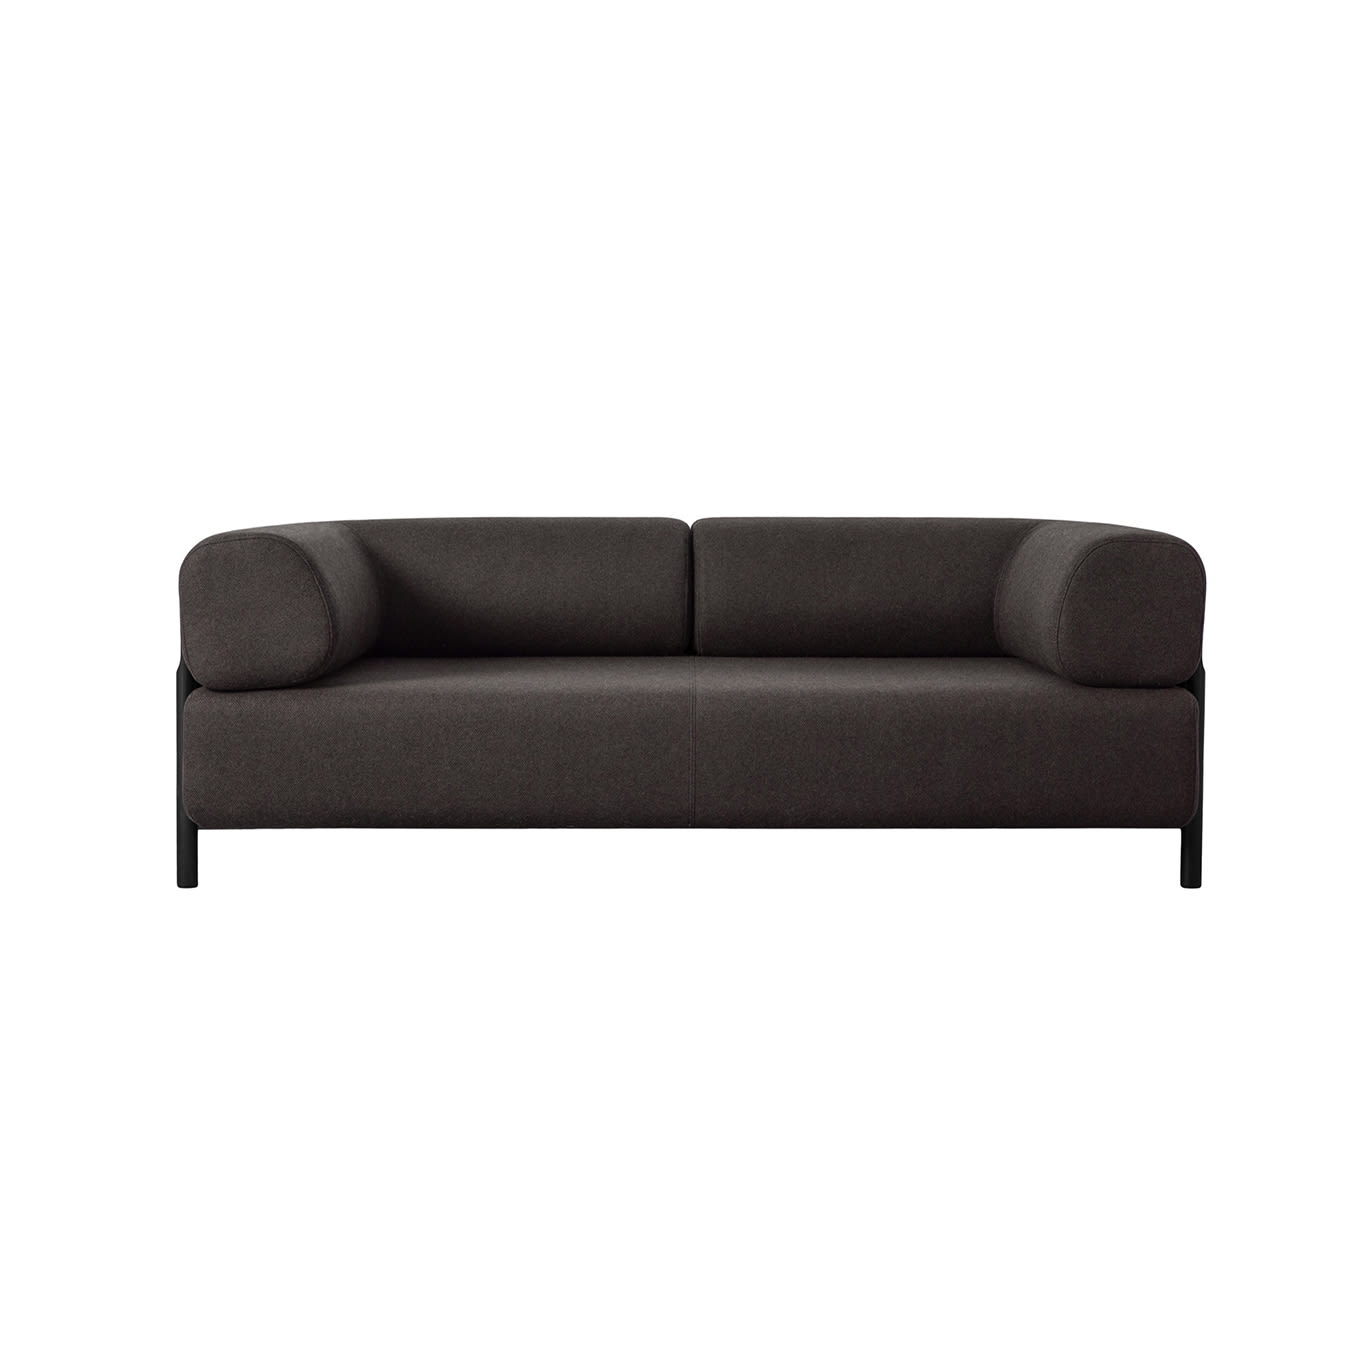 2-seater Sofa with Armrests, Brown-Black